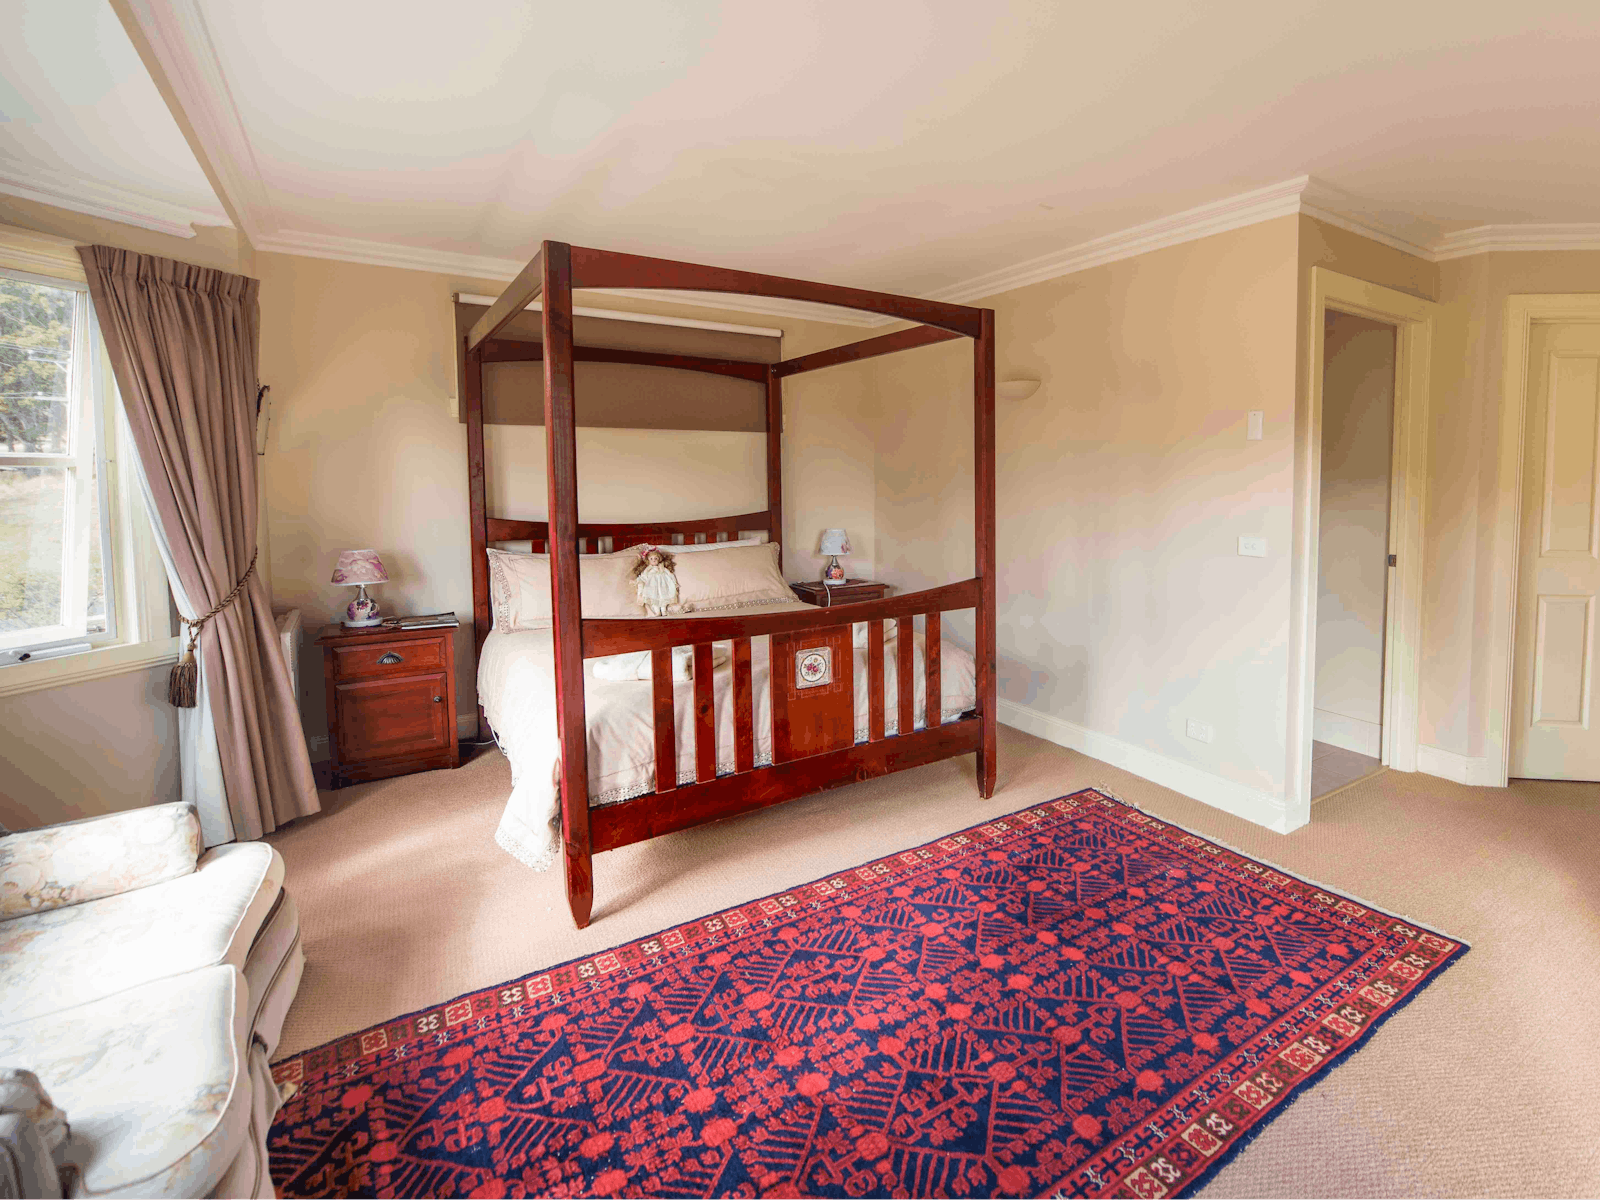 View of four poster bed, sitting area and ensuite